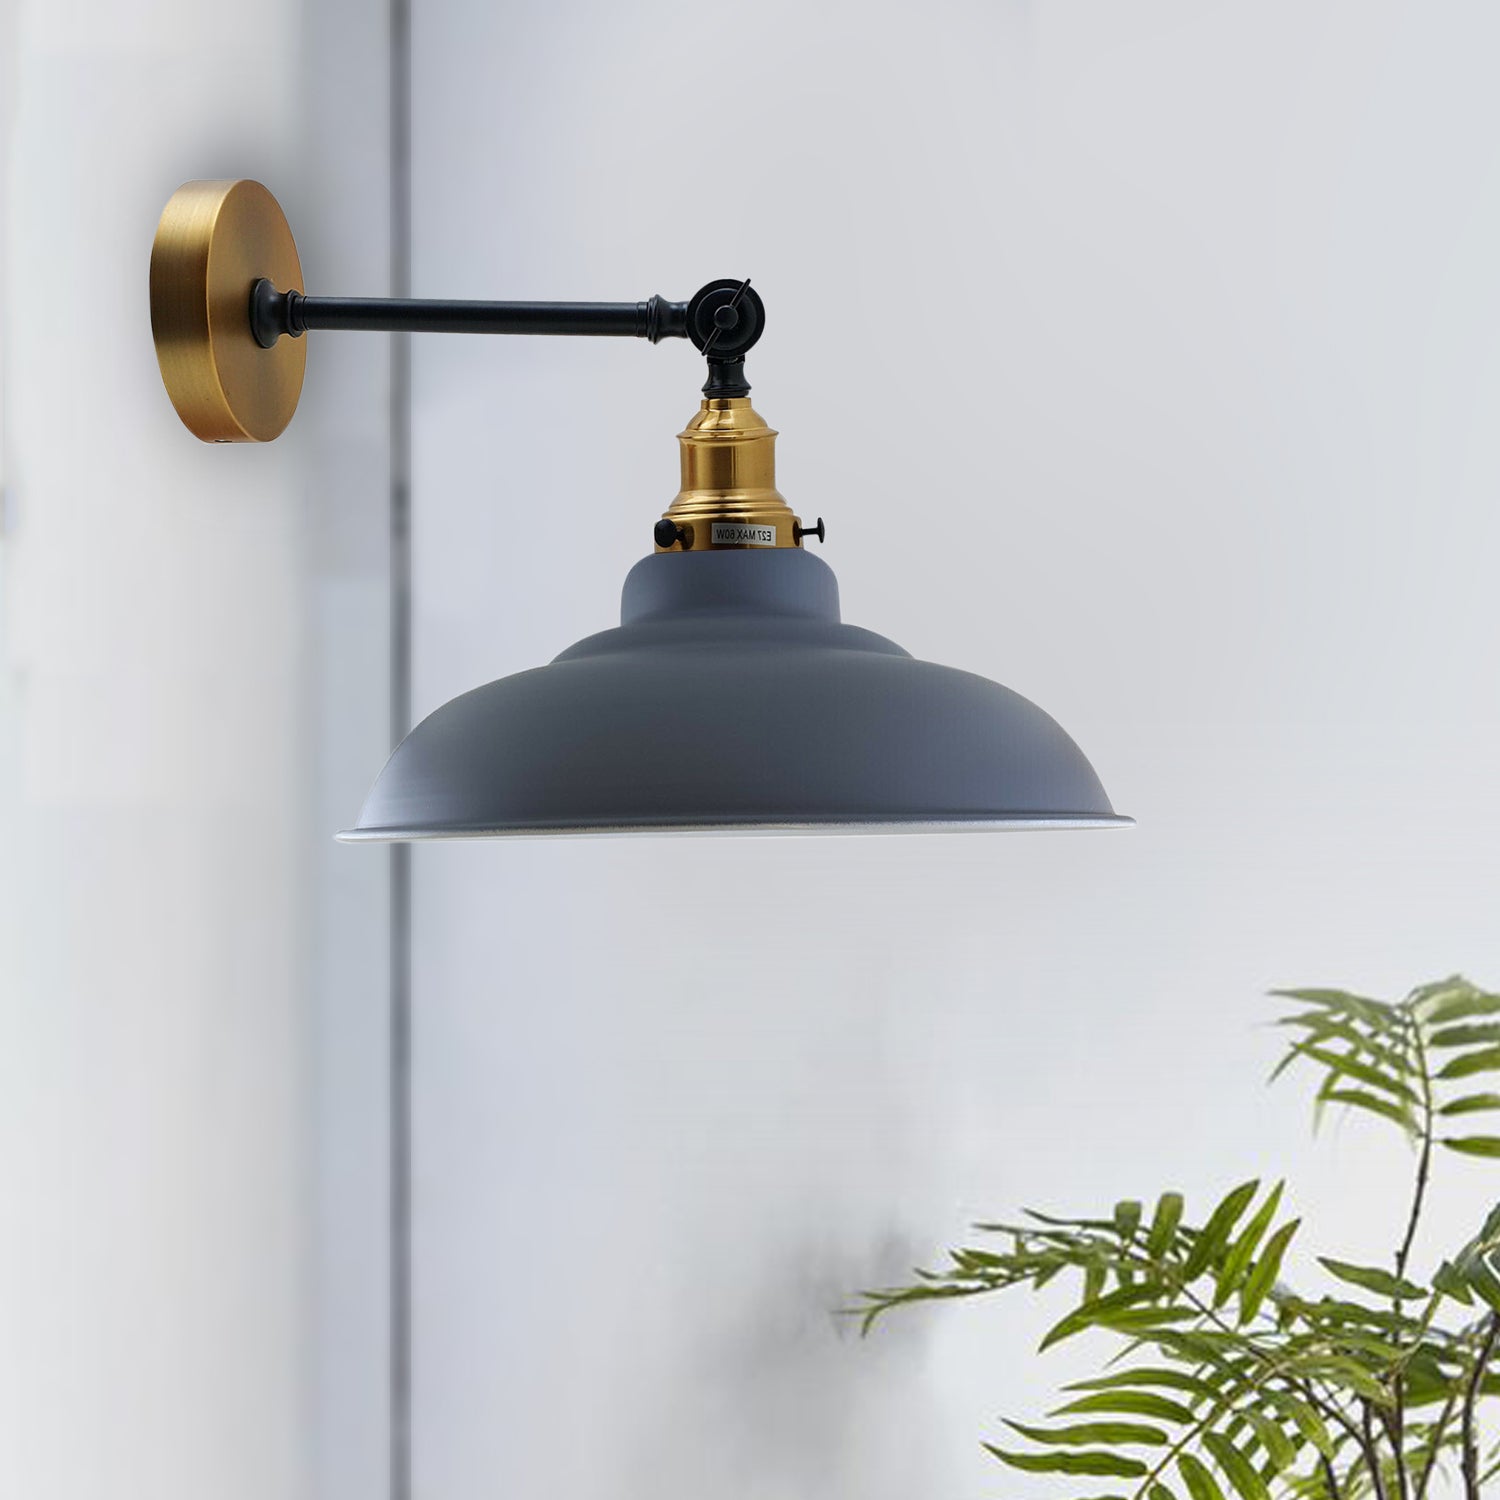 Grey Shade With Adjustable Curvy Swing Arm Wall Light Fixture Loft Style Industrial Wall Sconce~3464 - LEDSone UK Ltd